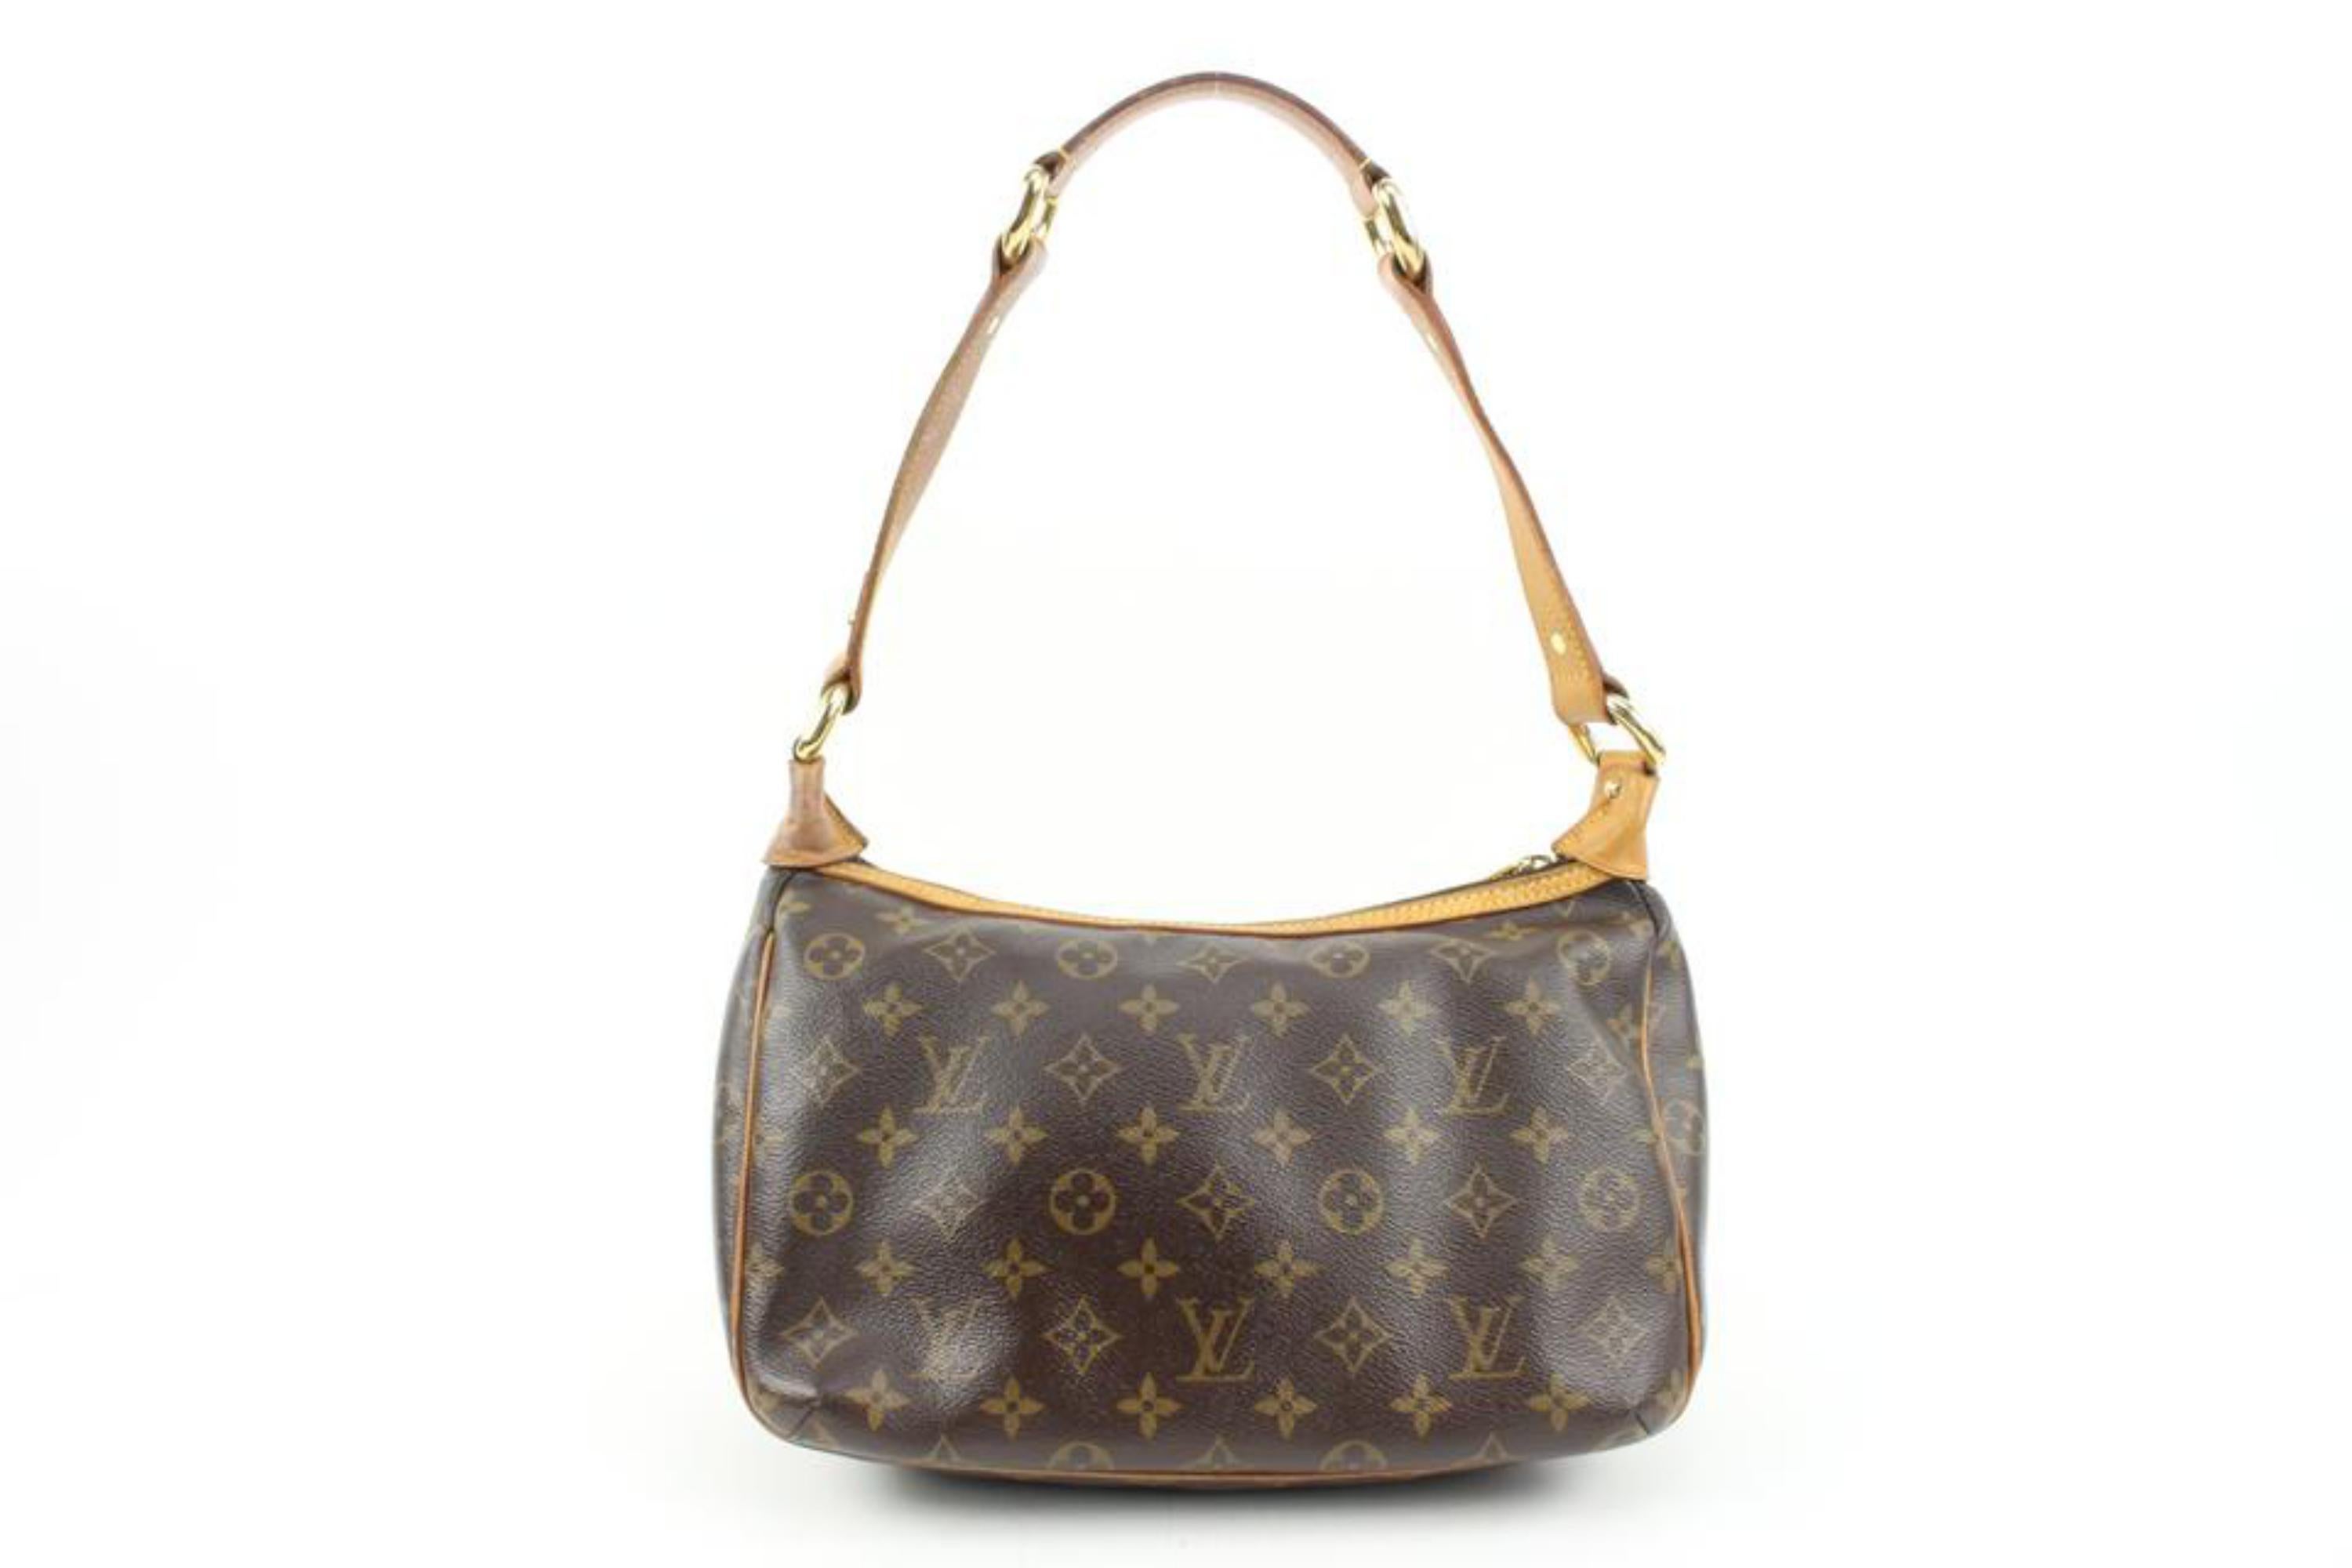 Louis Vuitton Discontinued Monogram Tulum Shoulder Bag s28lv21 In Good Condition For Sale In Dix hills, NY